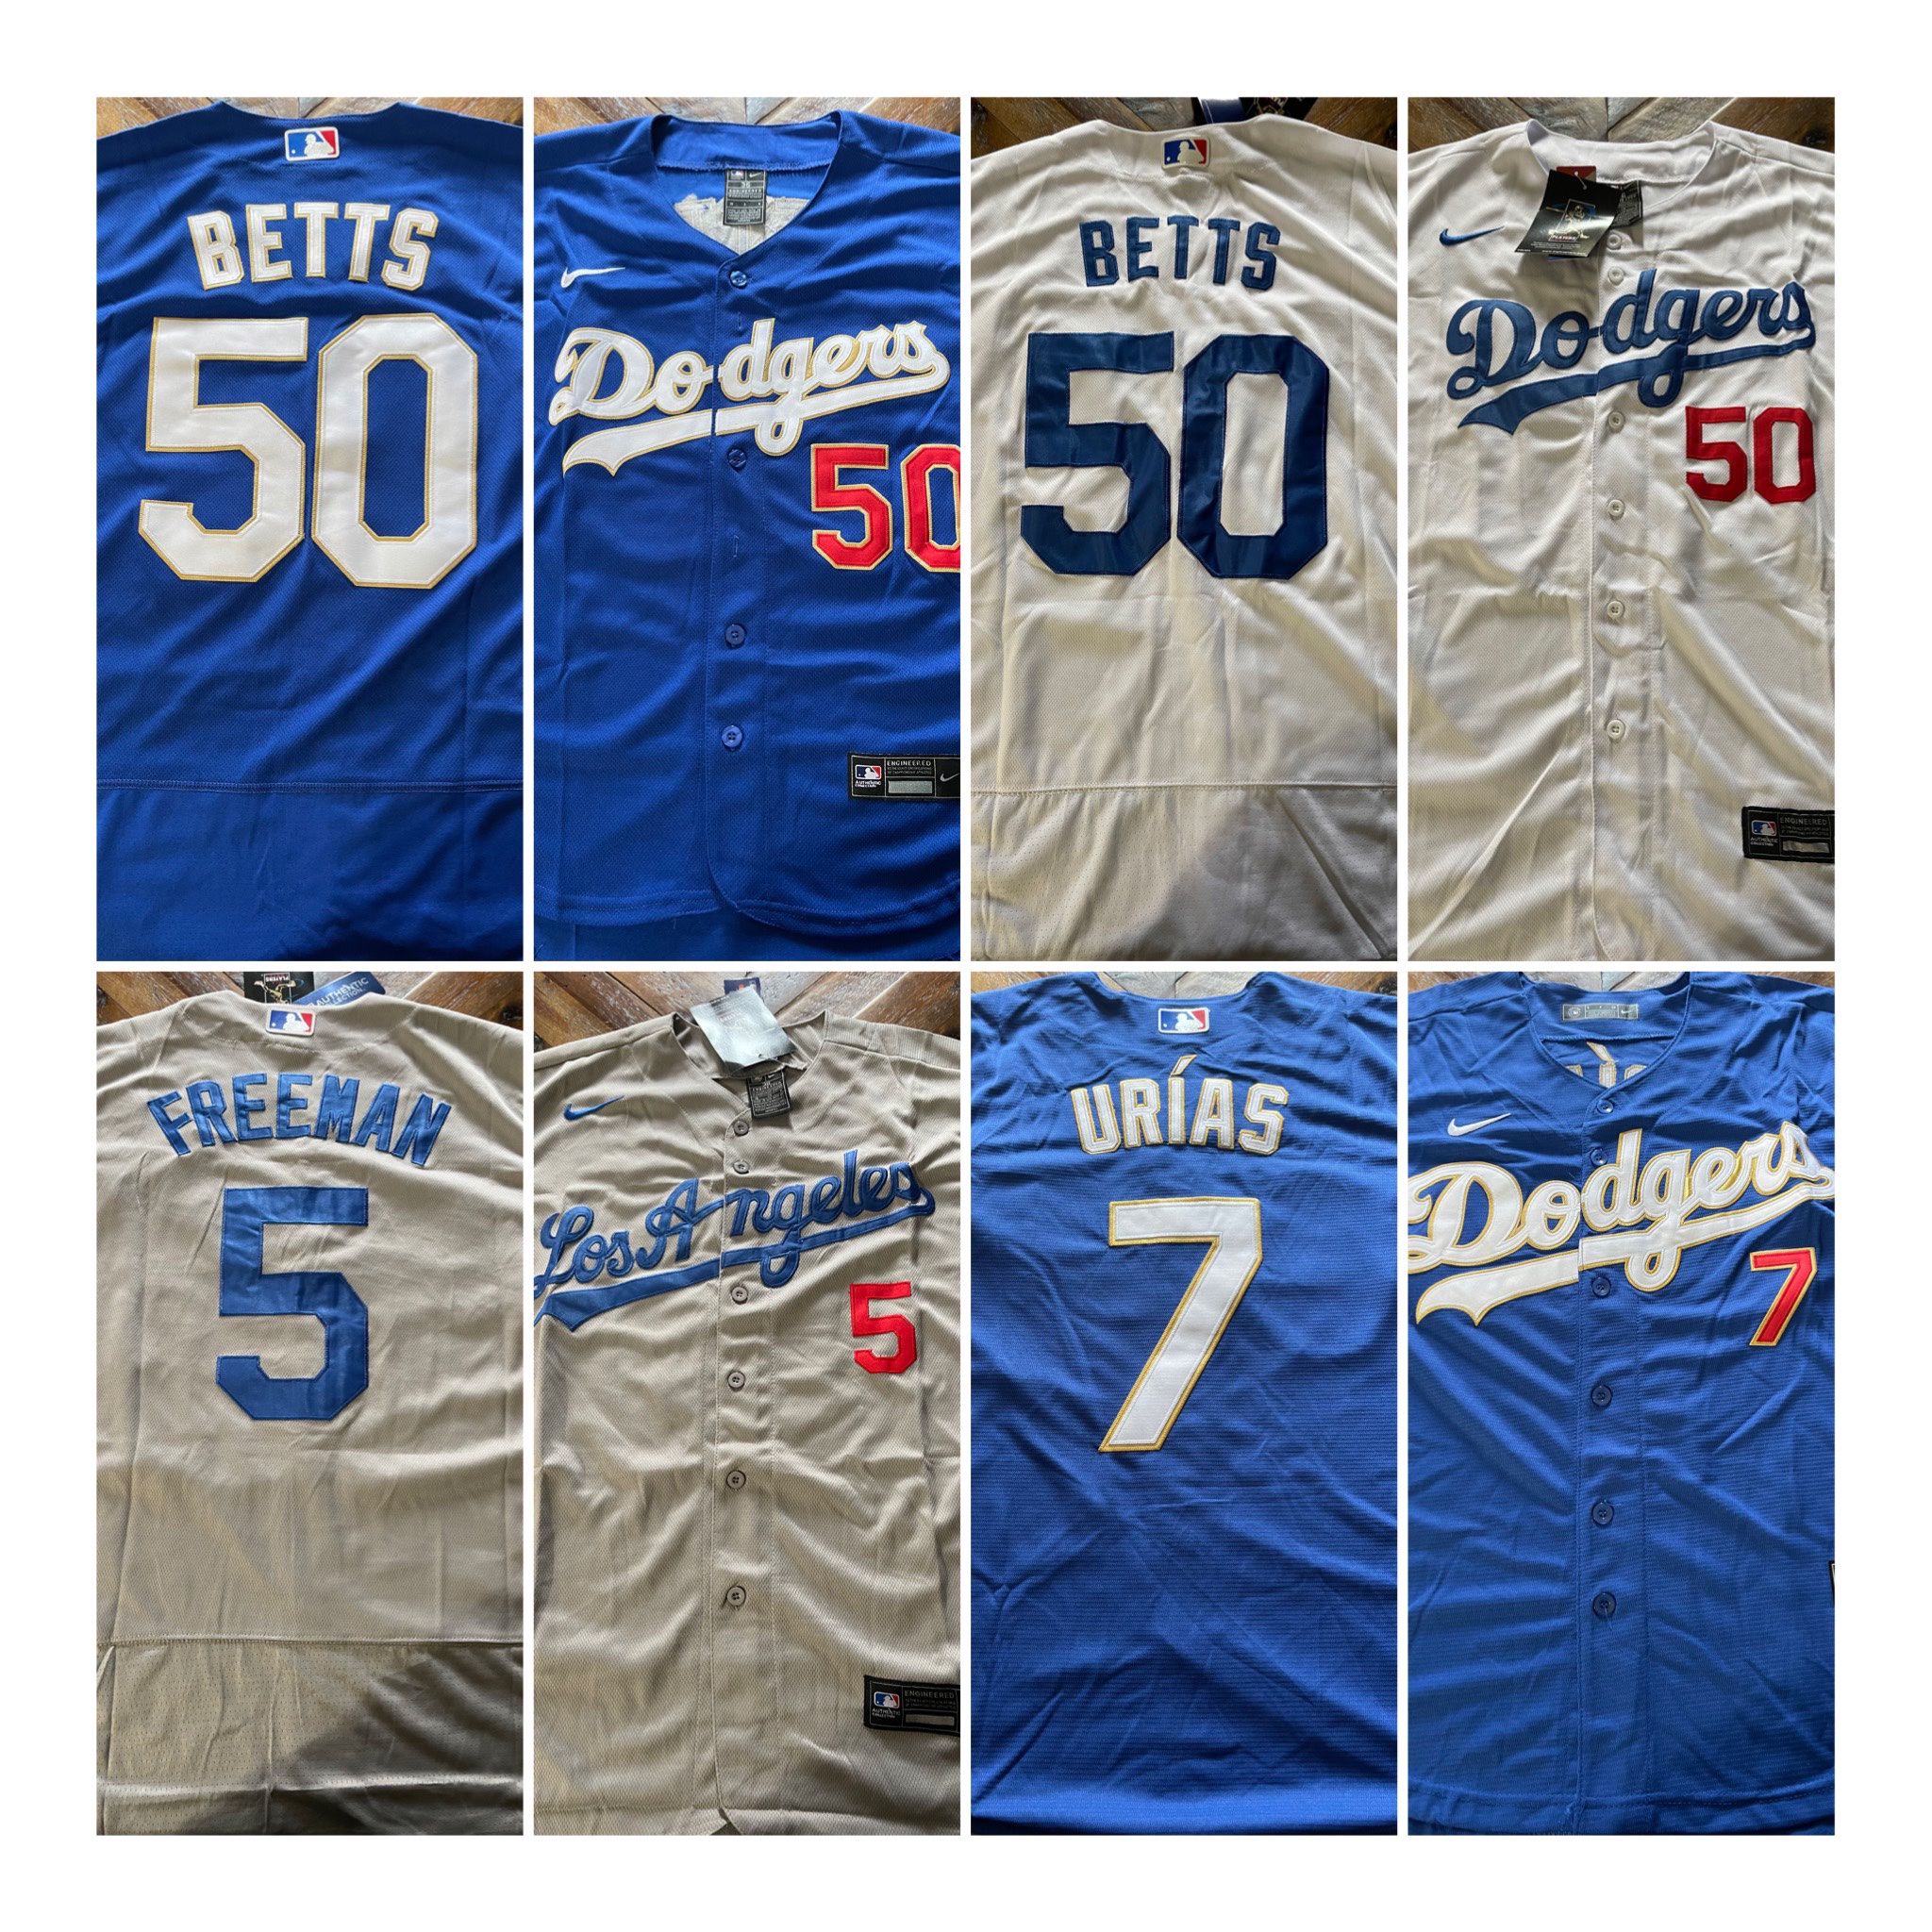 DODGERS JERSEYS!!!!!!#MLB for Sale in Onizuka Air Force Base, CA - OfferUp